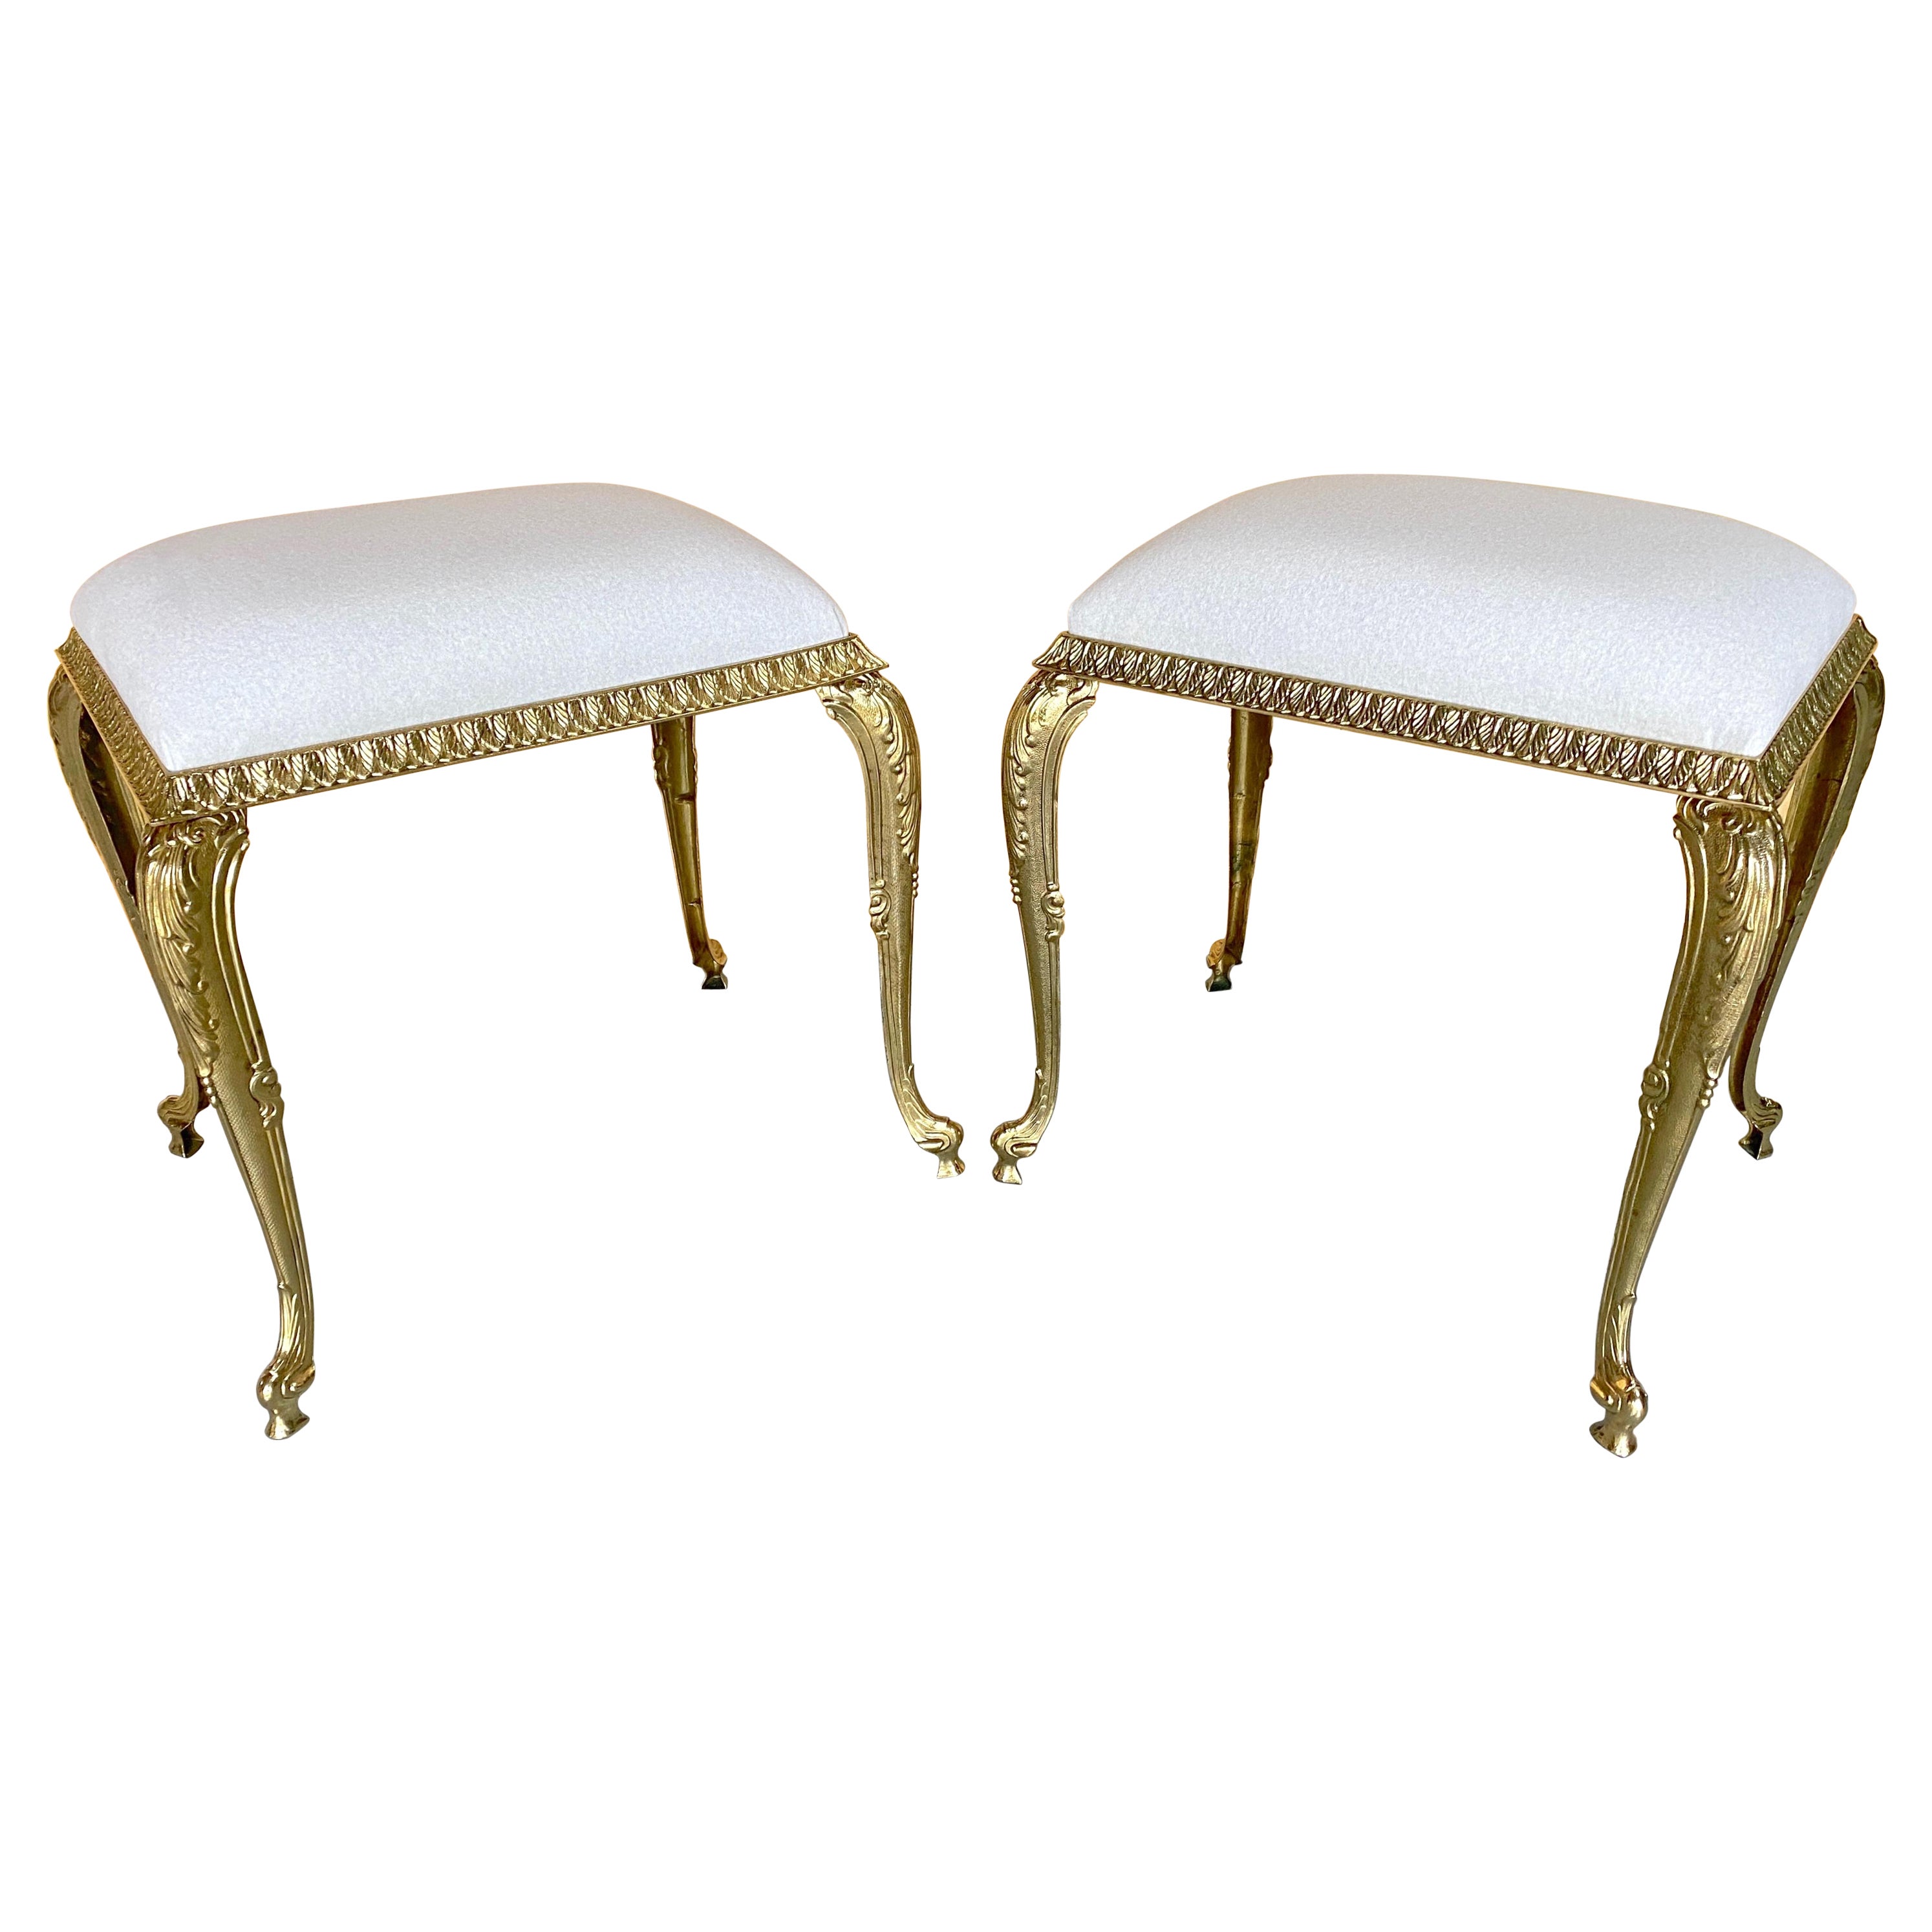 Pair of French Neoclassical Bronze Benches /Ottomans Kravet Cashmere Upholstery 